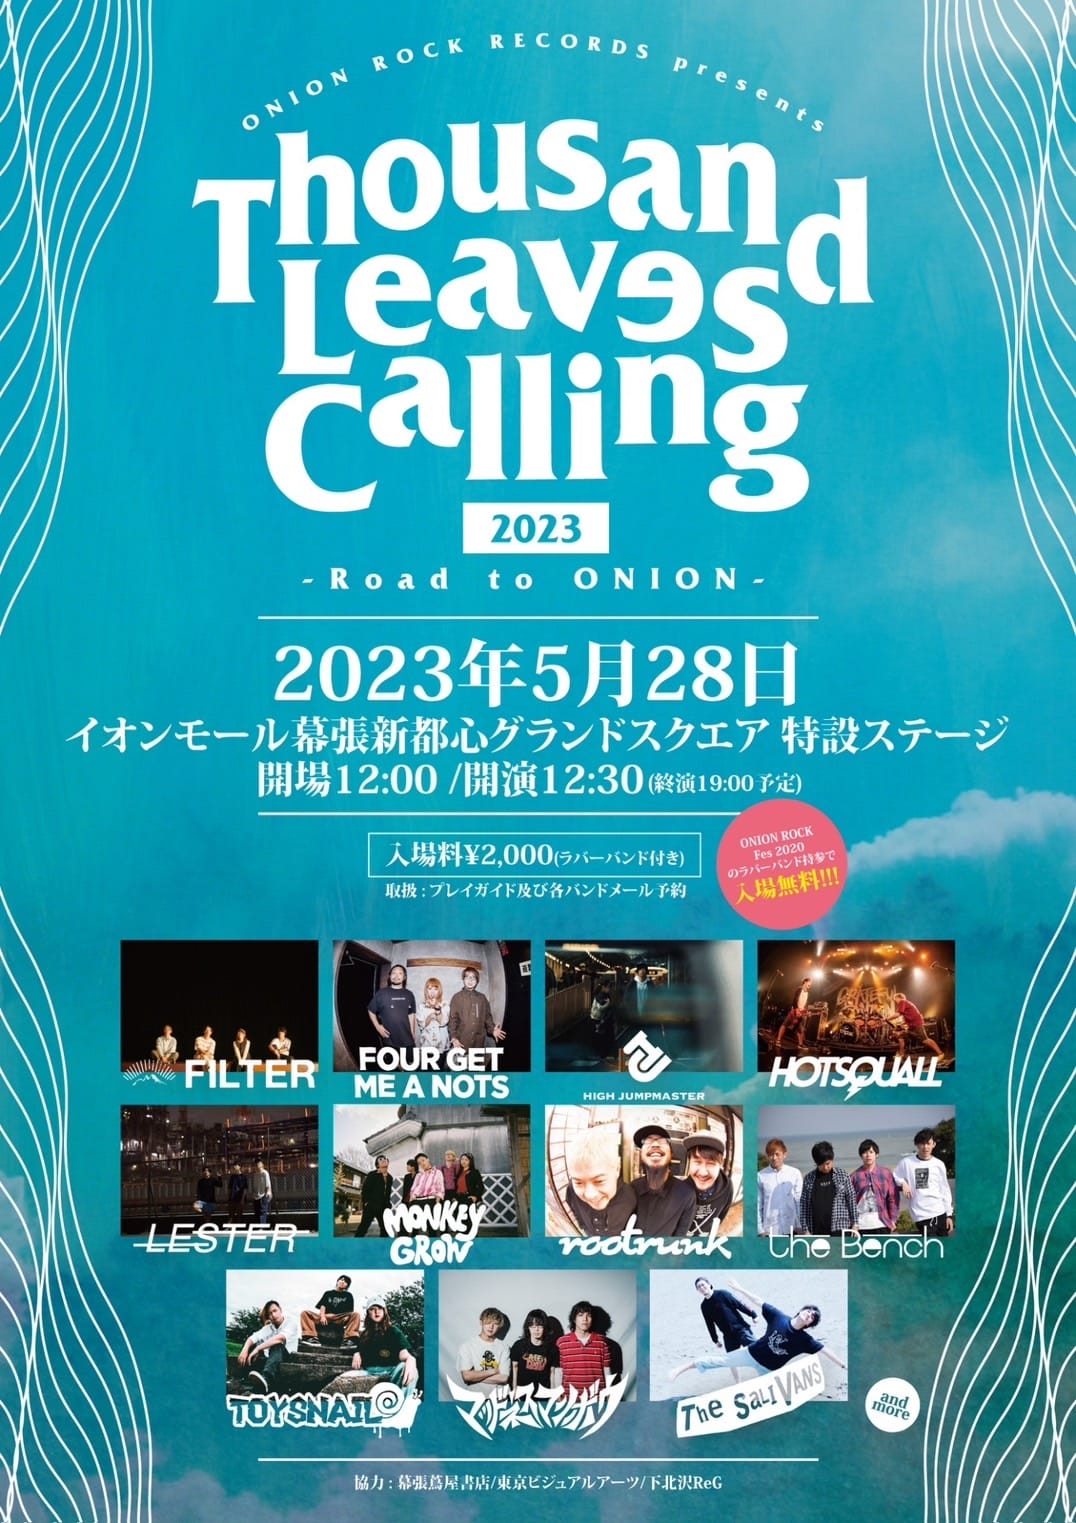 ONION ROCK RECORDS presents [Thousand Leaves Calling 2023 